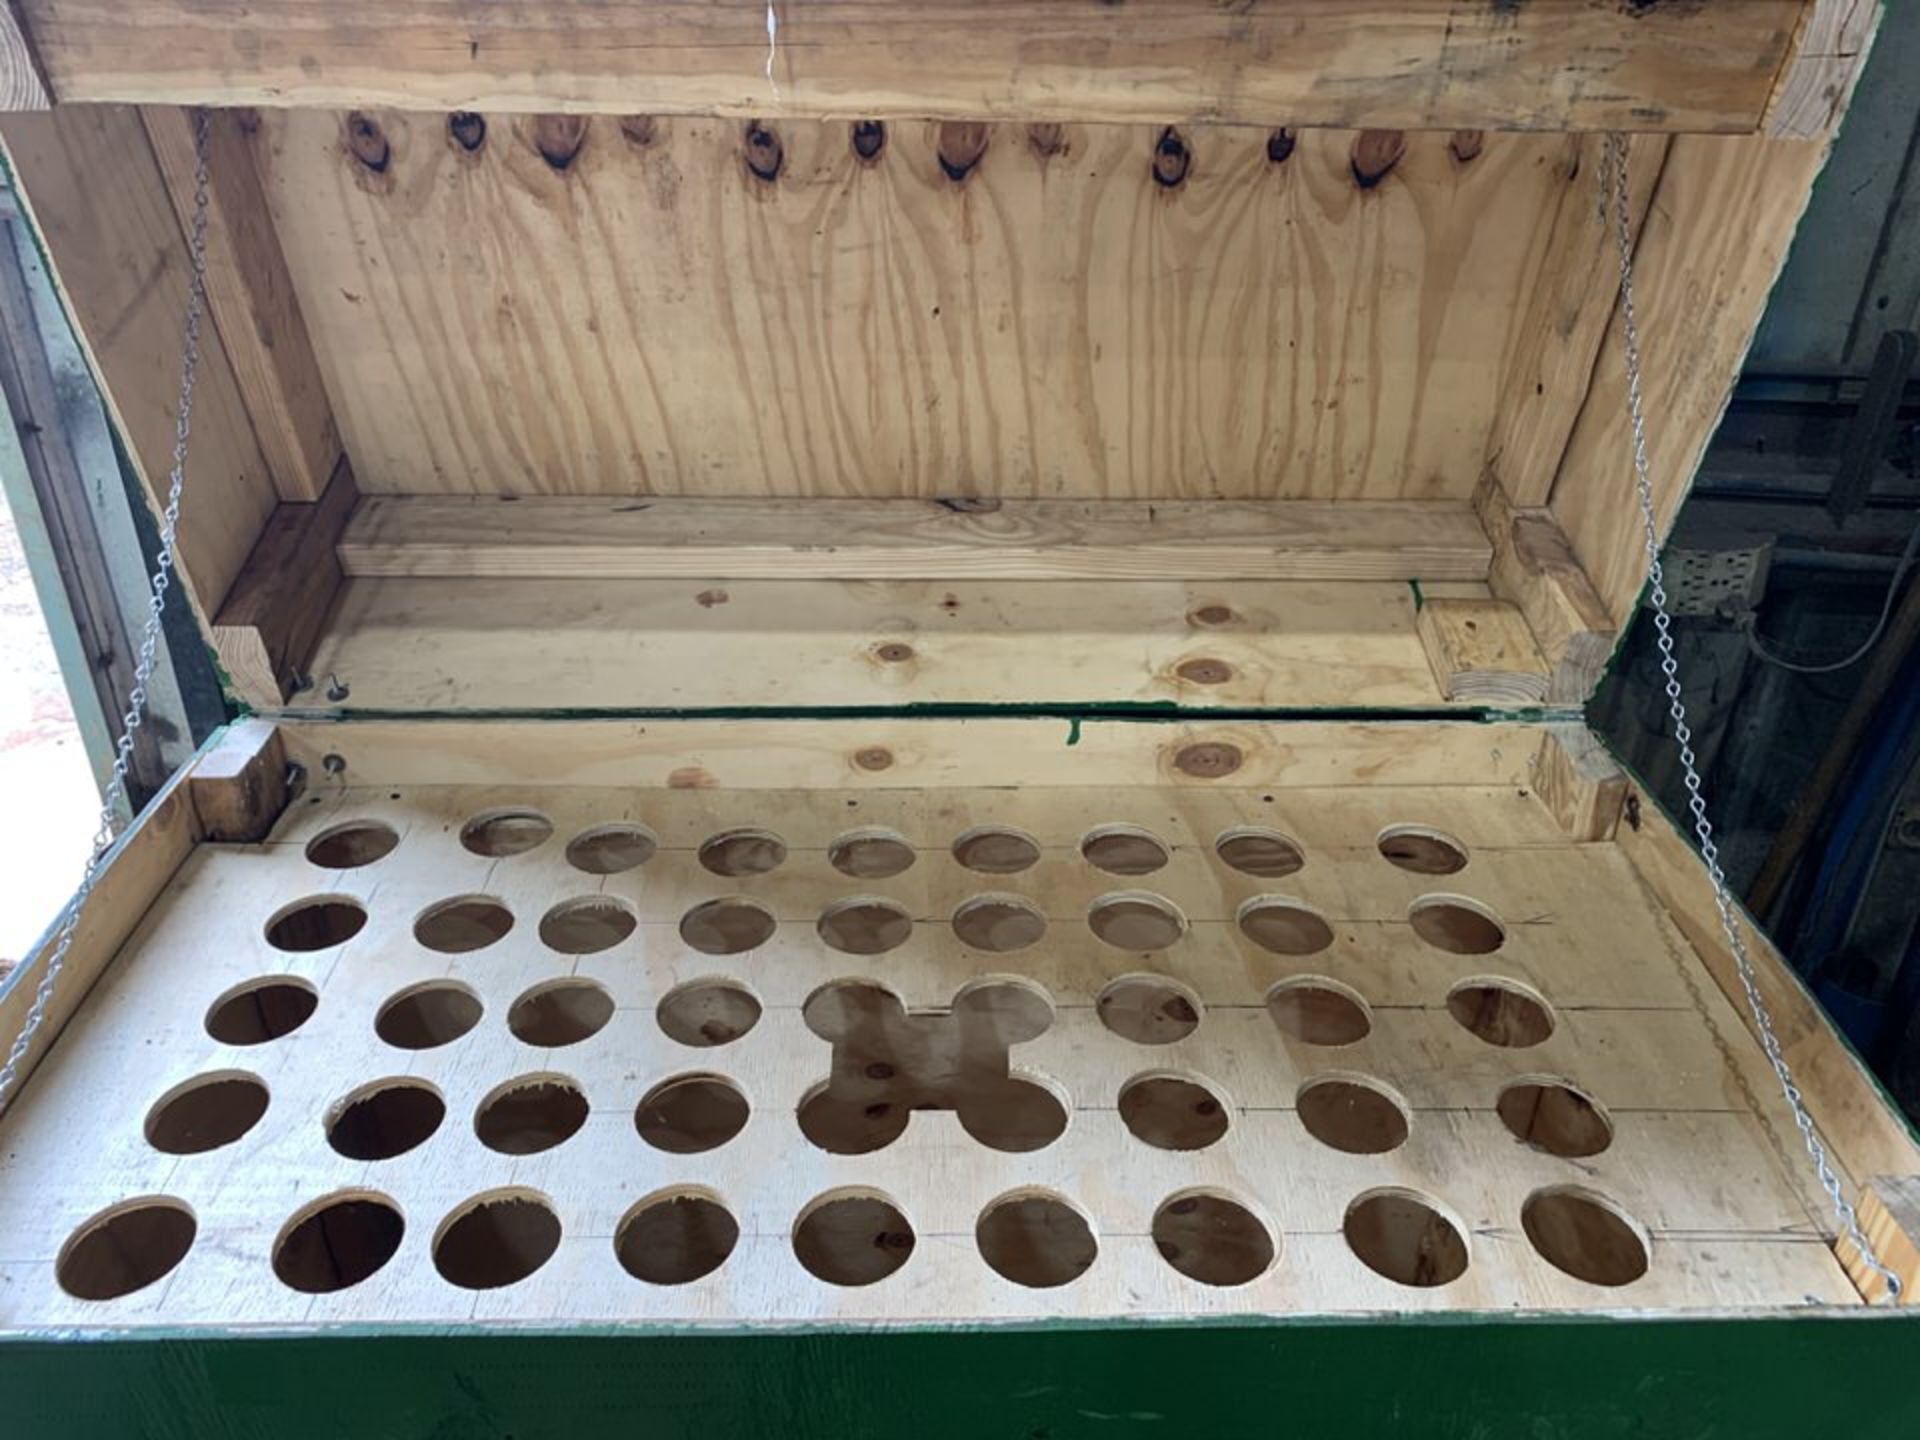 Wooden Tool Box with Holes for Holding Tools (green) - Image 3 of 3